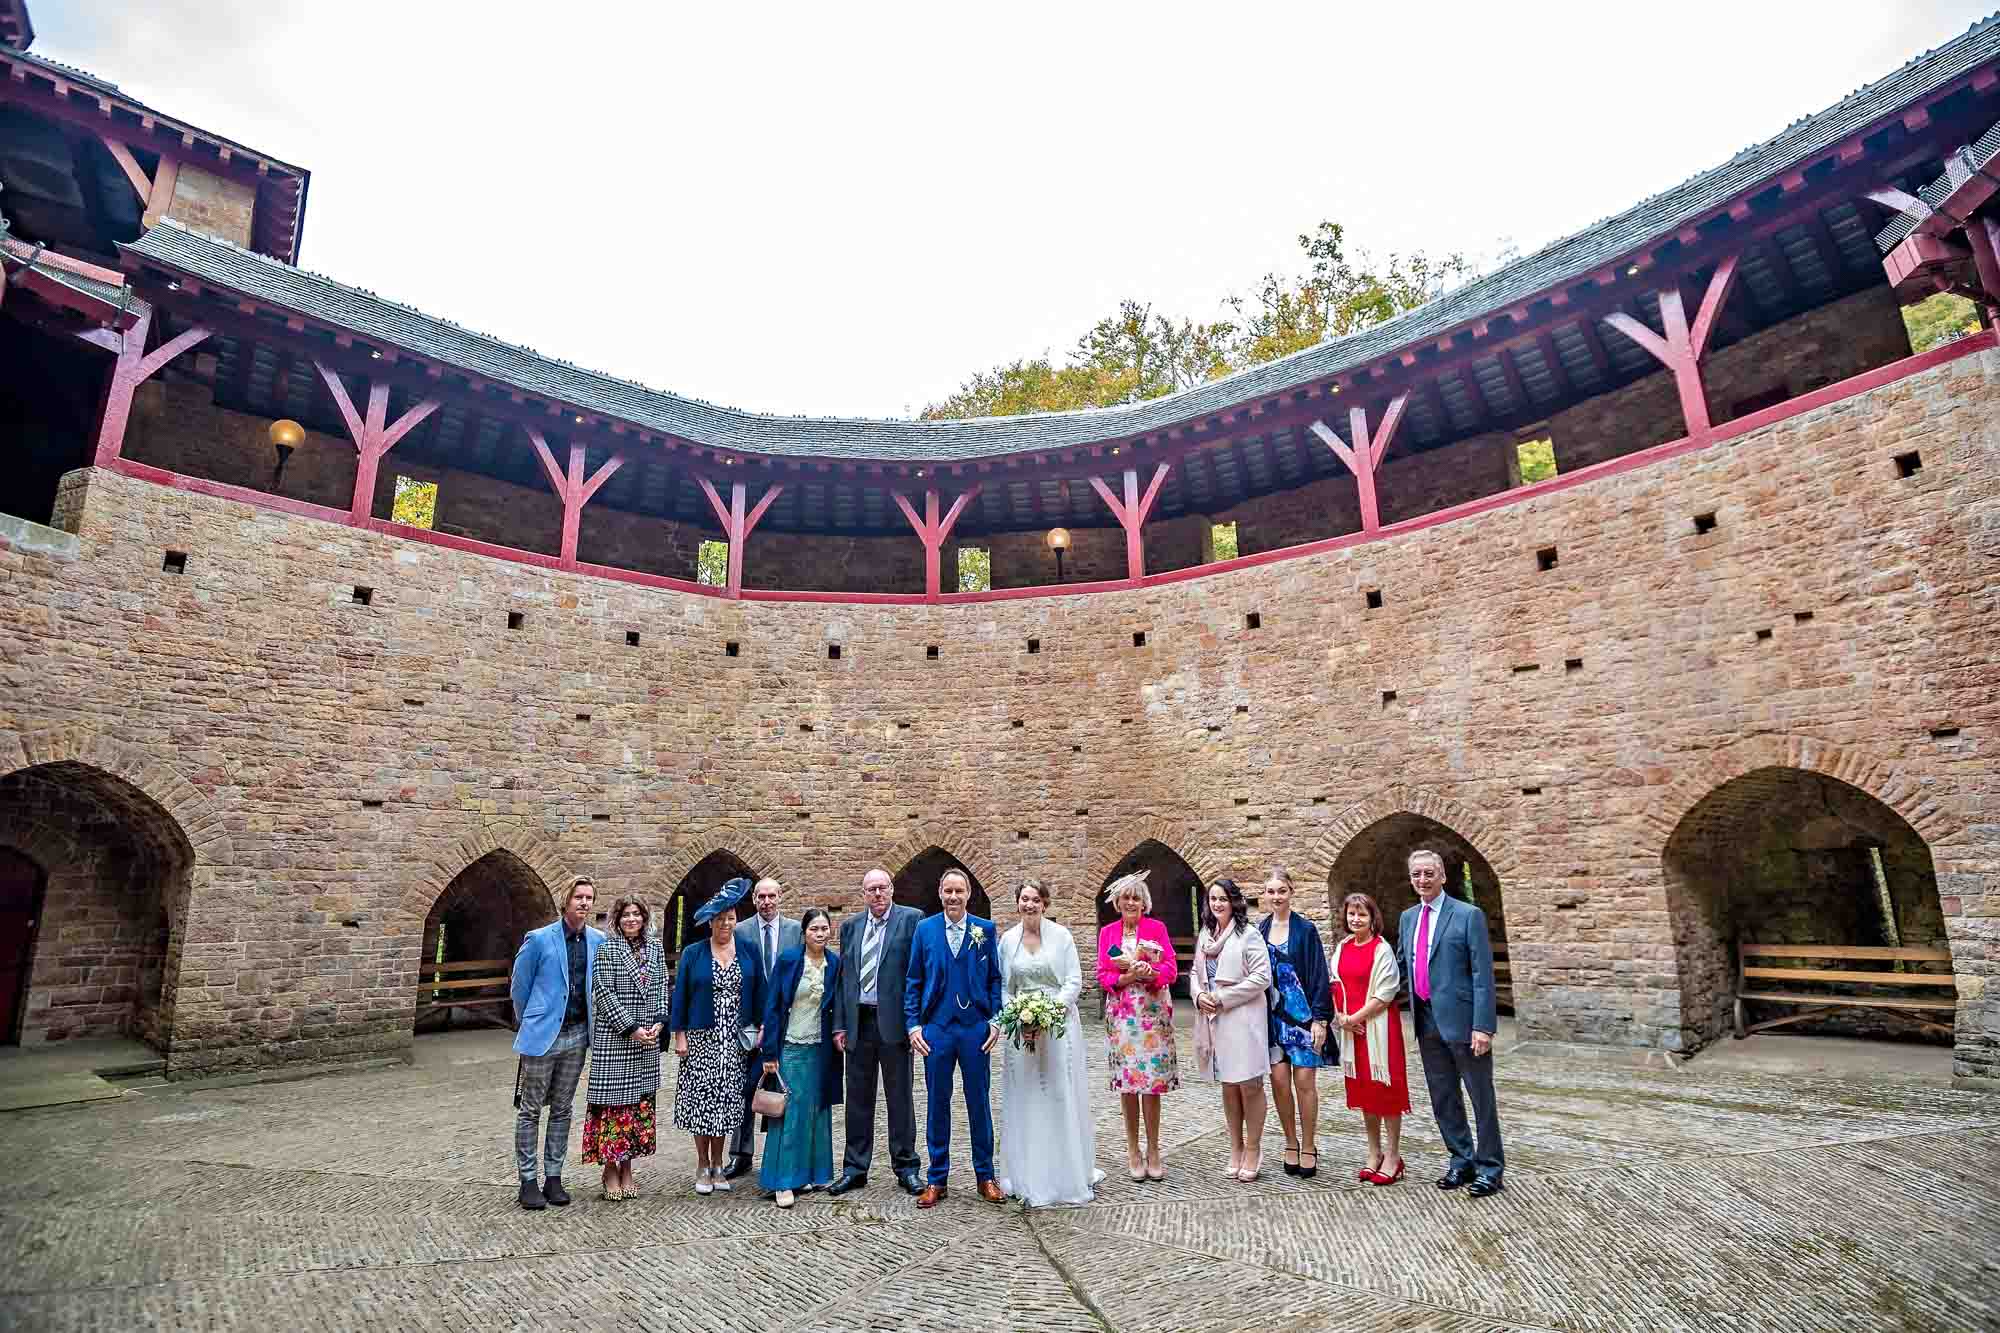 Whole wedding party lined up for photo in the courtyard of Castell Coch